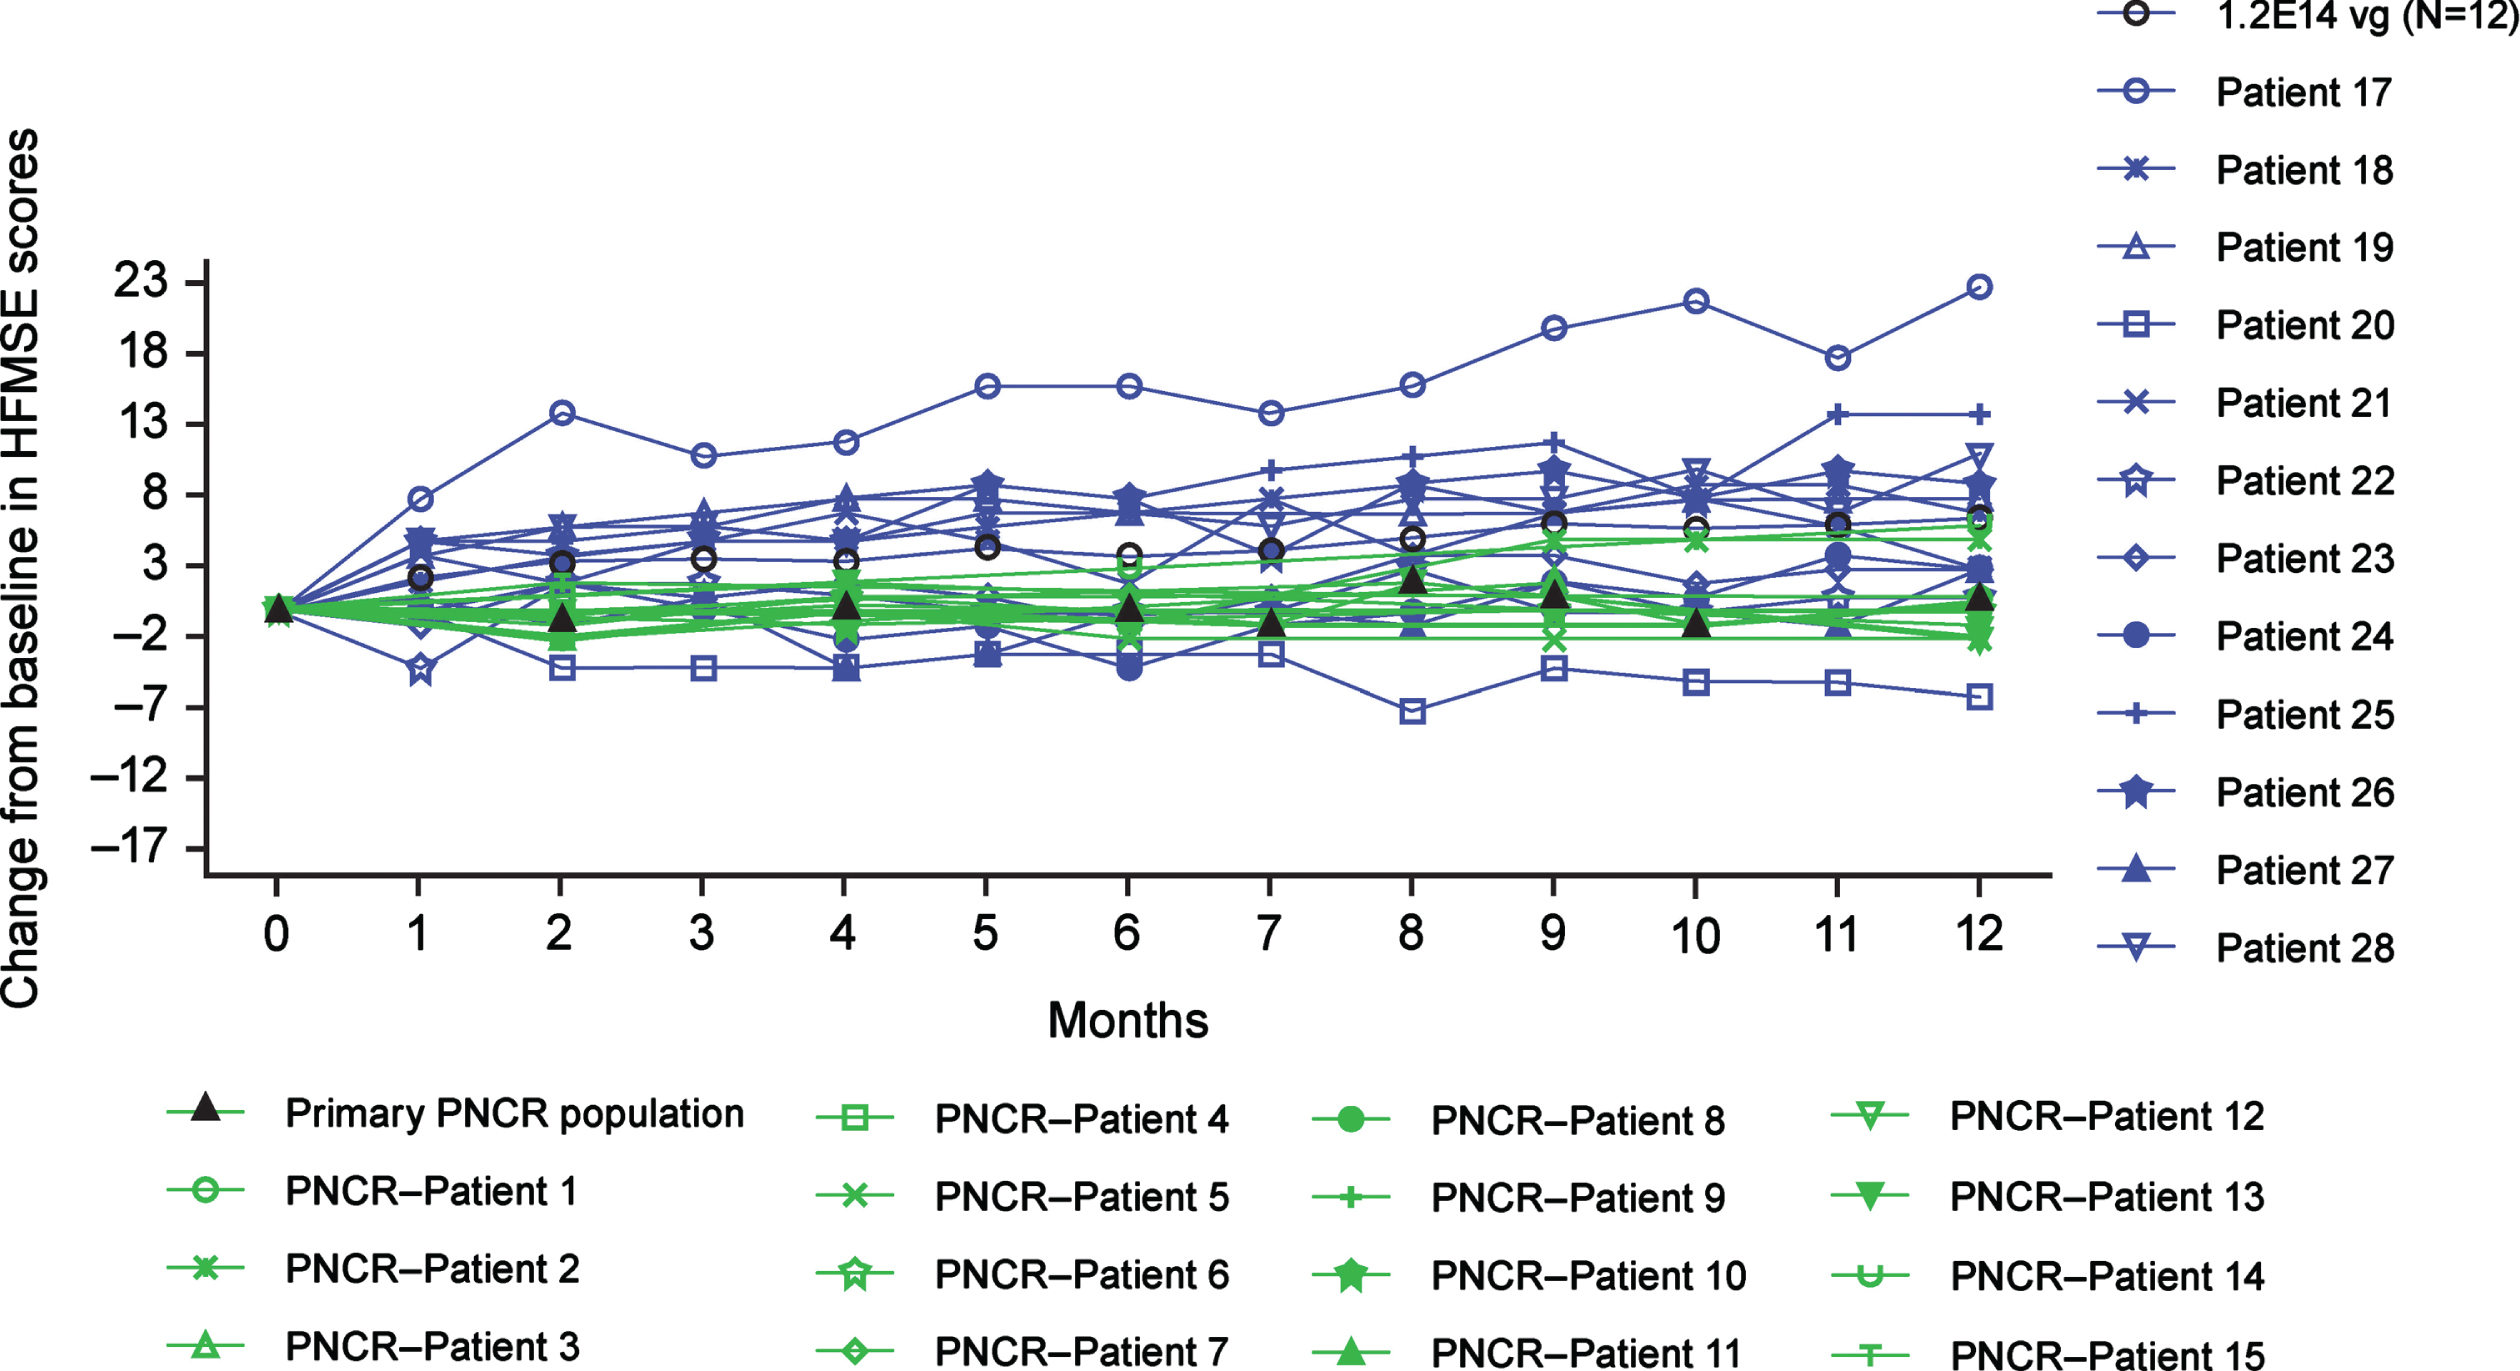 Change from baseline in HFMSE scores up to Month 12 for the older group (ITT population). All patients were treated with 1.2×1014 vg onasemnogene abeparvovec (medium dose) administered via intrathecal administration (N = 12). The PNCR cohort represents the primary PNCR population that contains a subset of 15 patients from the PNCR natural history control population who had SMA types 2 or 3, three copies of SMN2, symptom onset before 12 months of age, diagnosis before 24 months of age, were unable to stand or walk at enrollment (baseline visit), received an HFMSE evaluation between 24 and 60 months of age (“baseline”), and had a follow-up evaluation (HFMS of HFMSE performed between 12 and 14 months following that baseline evaluation. Older group, 24 to <60 months of age at dosing. HFMS, Hammersmith Functional Motor Scale; HFMSE, Hammersmith Functional Motor Scale-Expanded; ITT, intention-to-treat; PNCR, Pediatric Neuromuscular Clinical Research; vg, vector genomes.